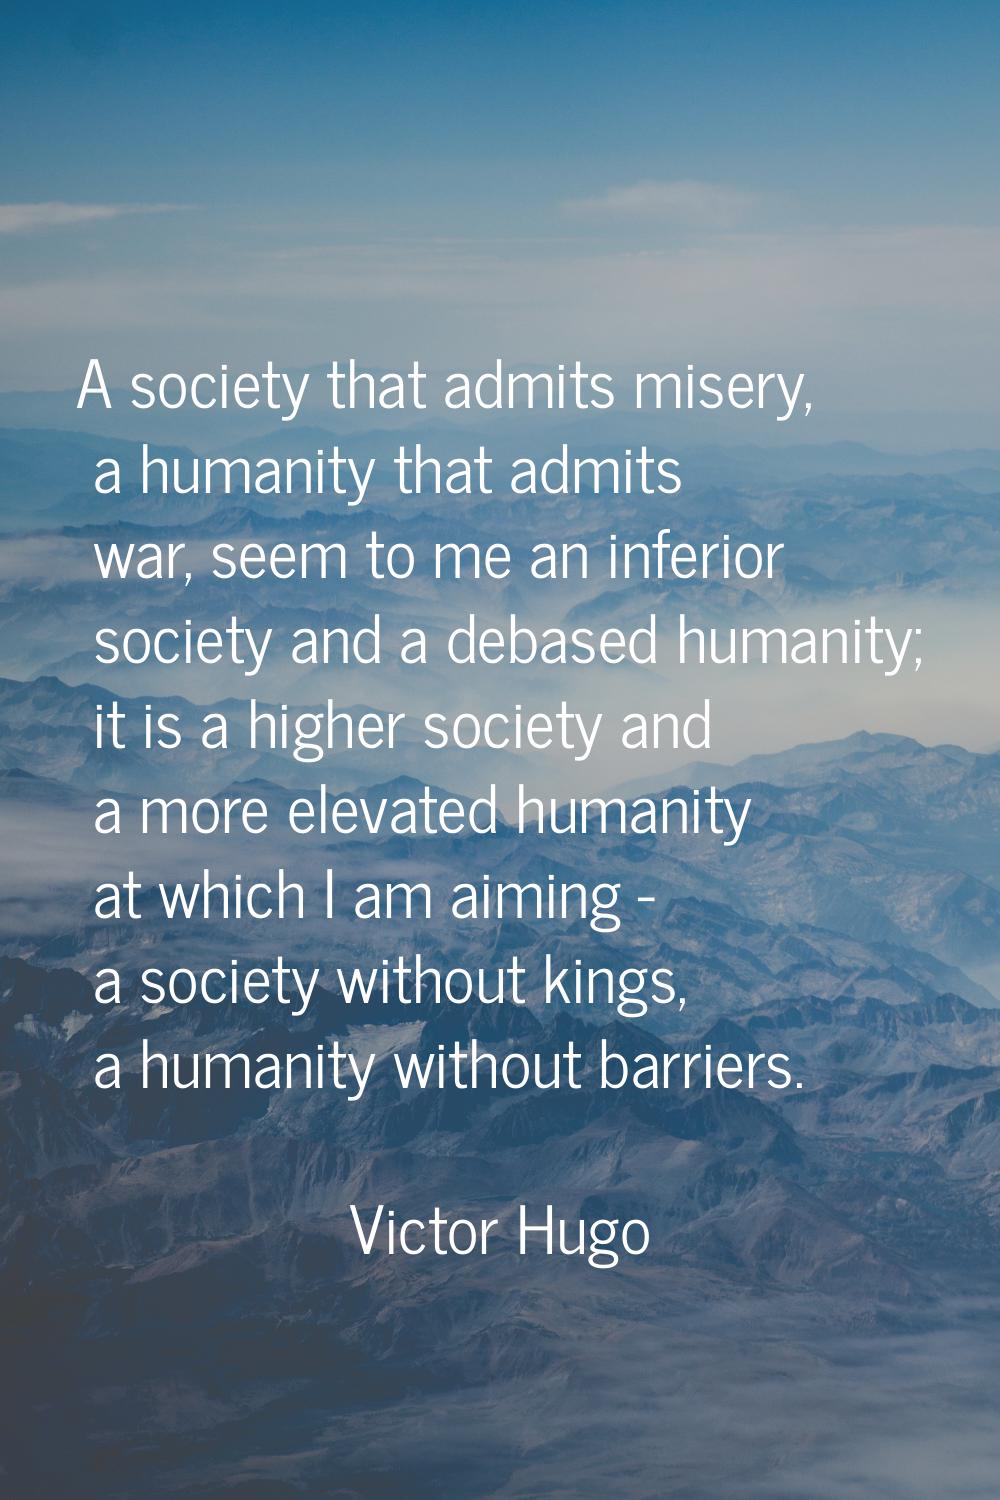 A society that admits misery, a humanity that admits war, seem to me an inferior society and a deba